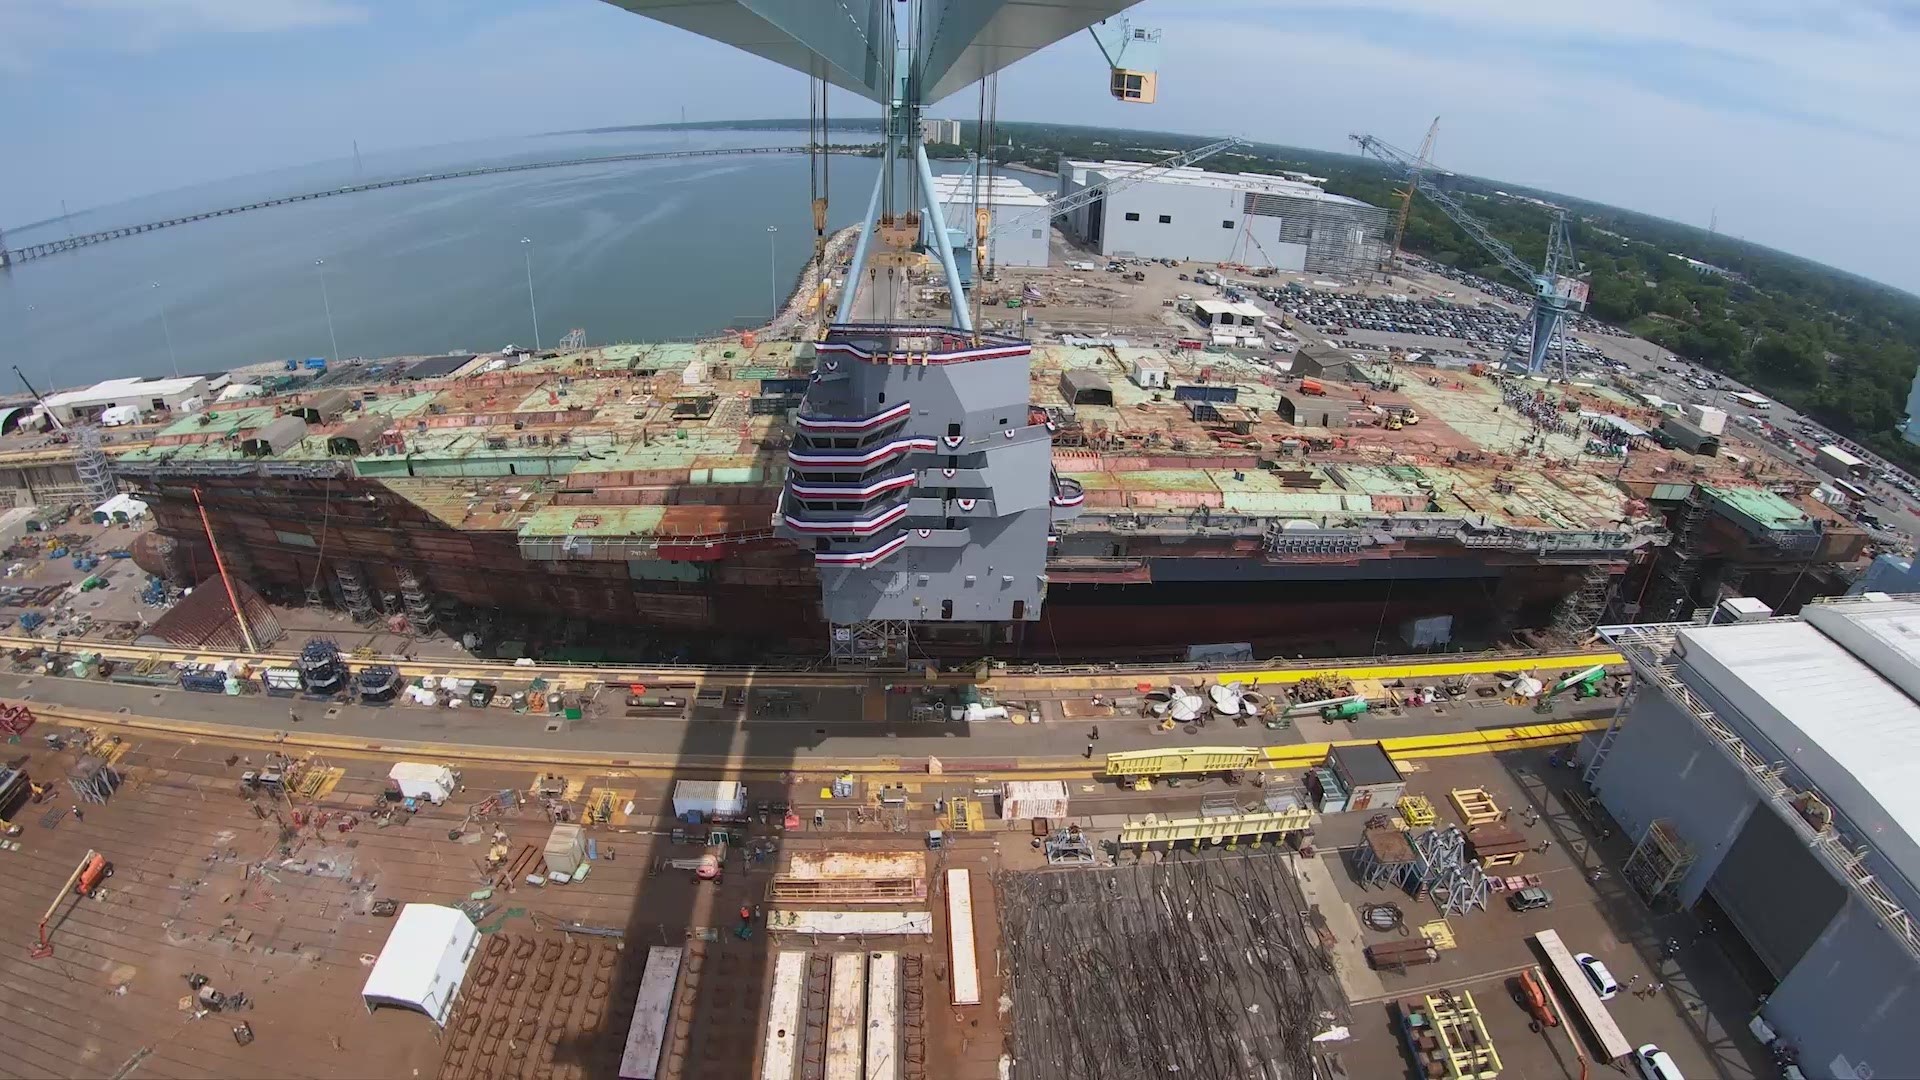 Newport News Shipbuilding adds the island onto the future USS John F. Kennedy. The island gives the ship the distinctive profile of an aircraft carrier.